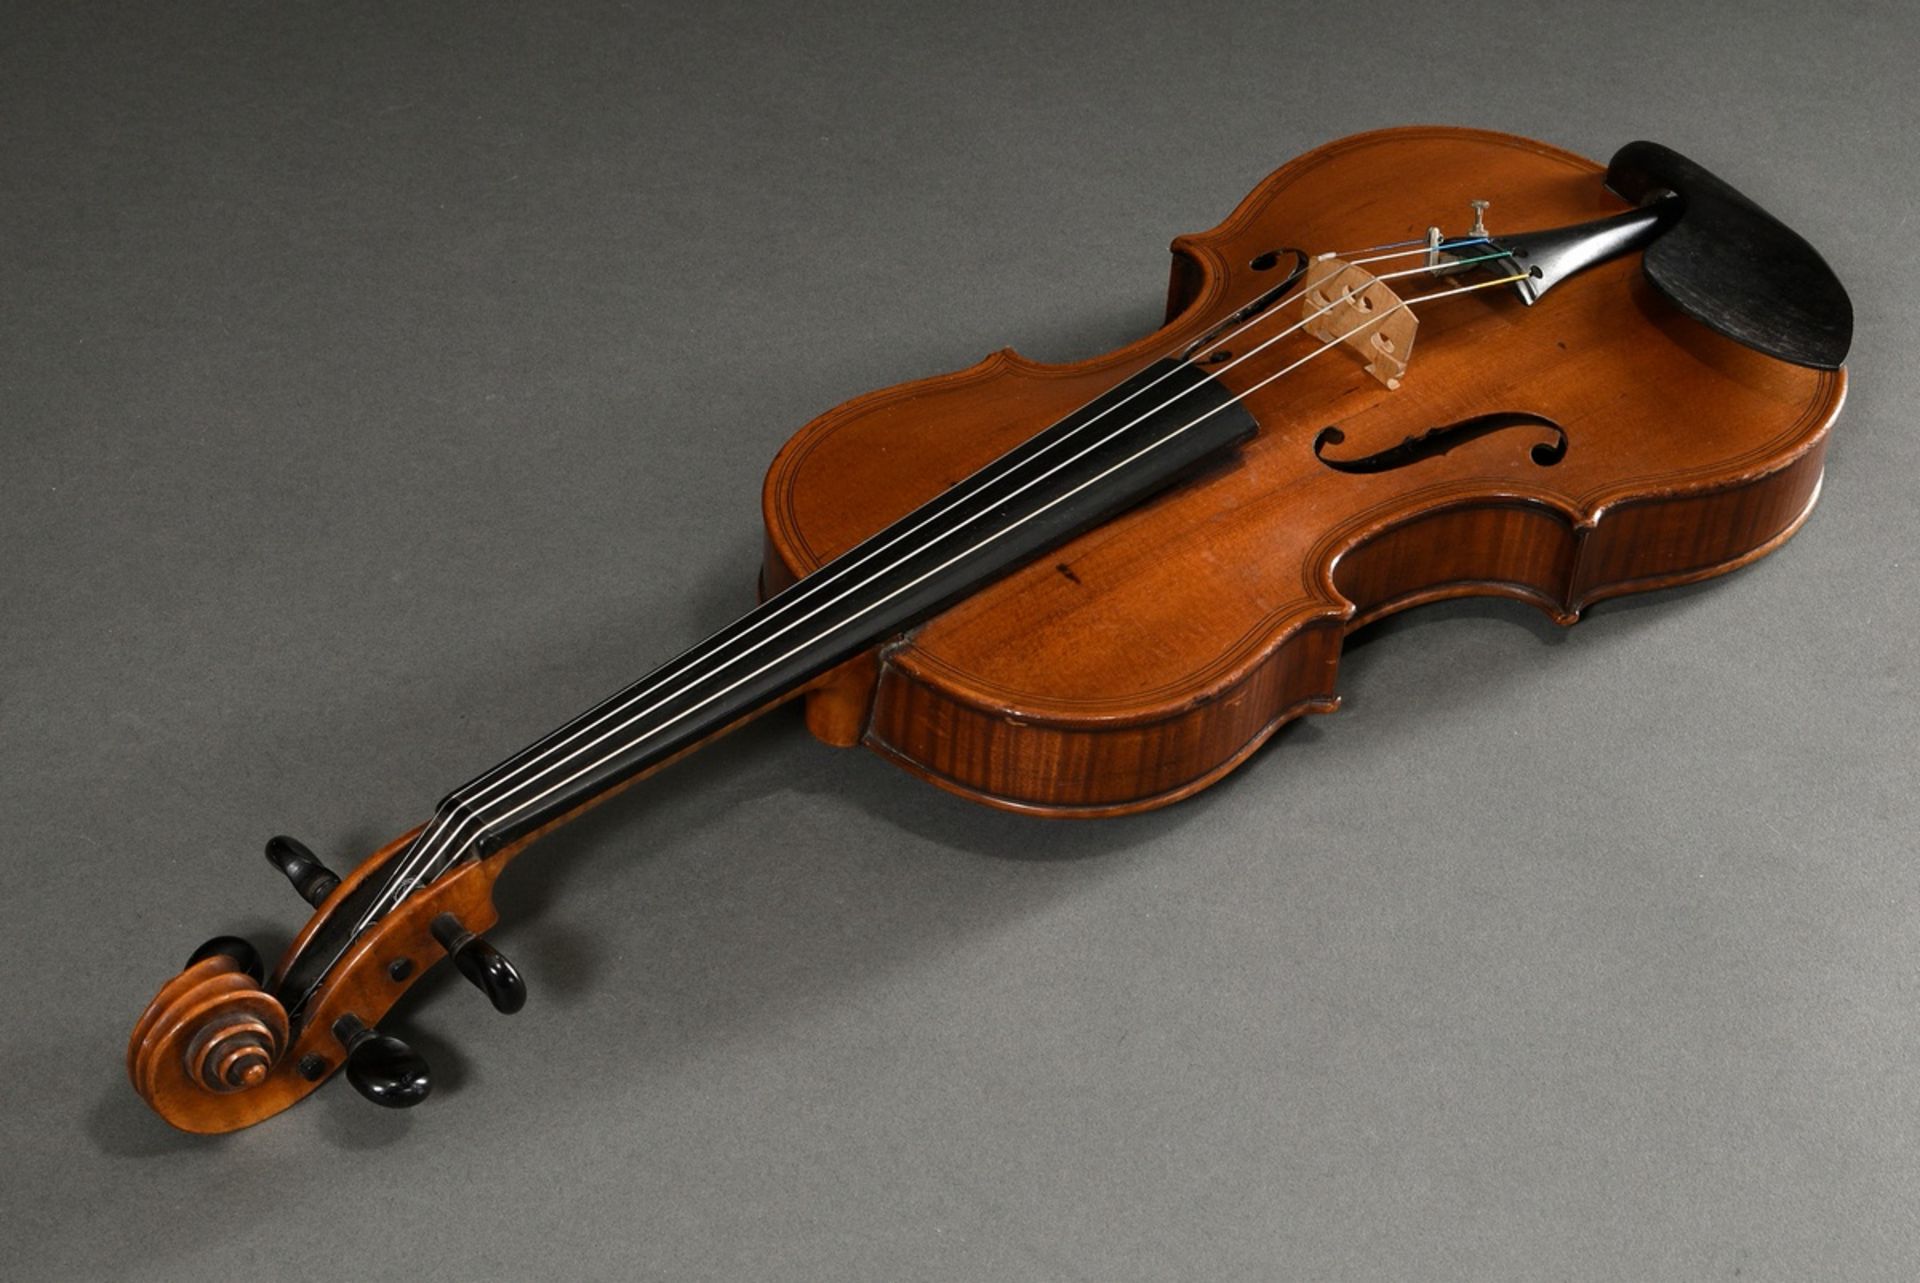 Elegant violin after Maggini, German 19th c., fine-grained spruce top, two-piece beautifully flamed - Image 7 of 16